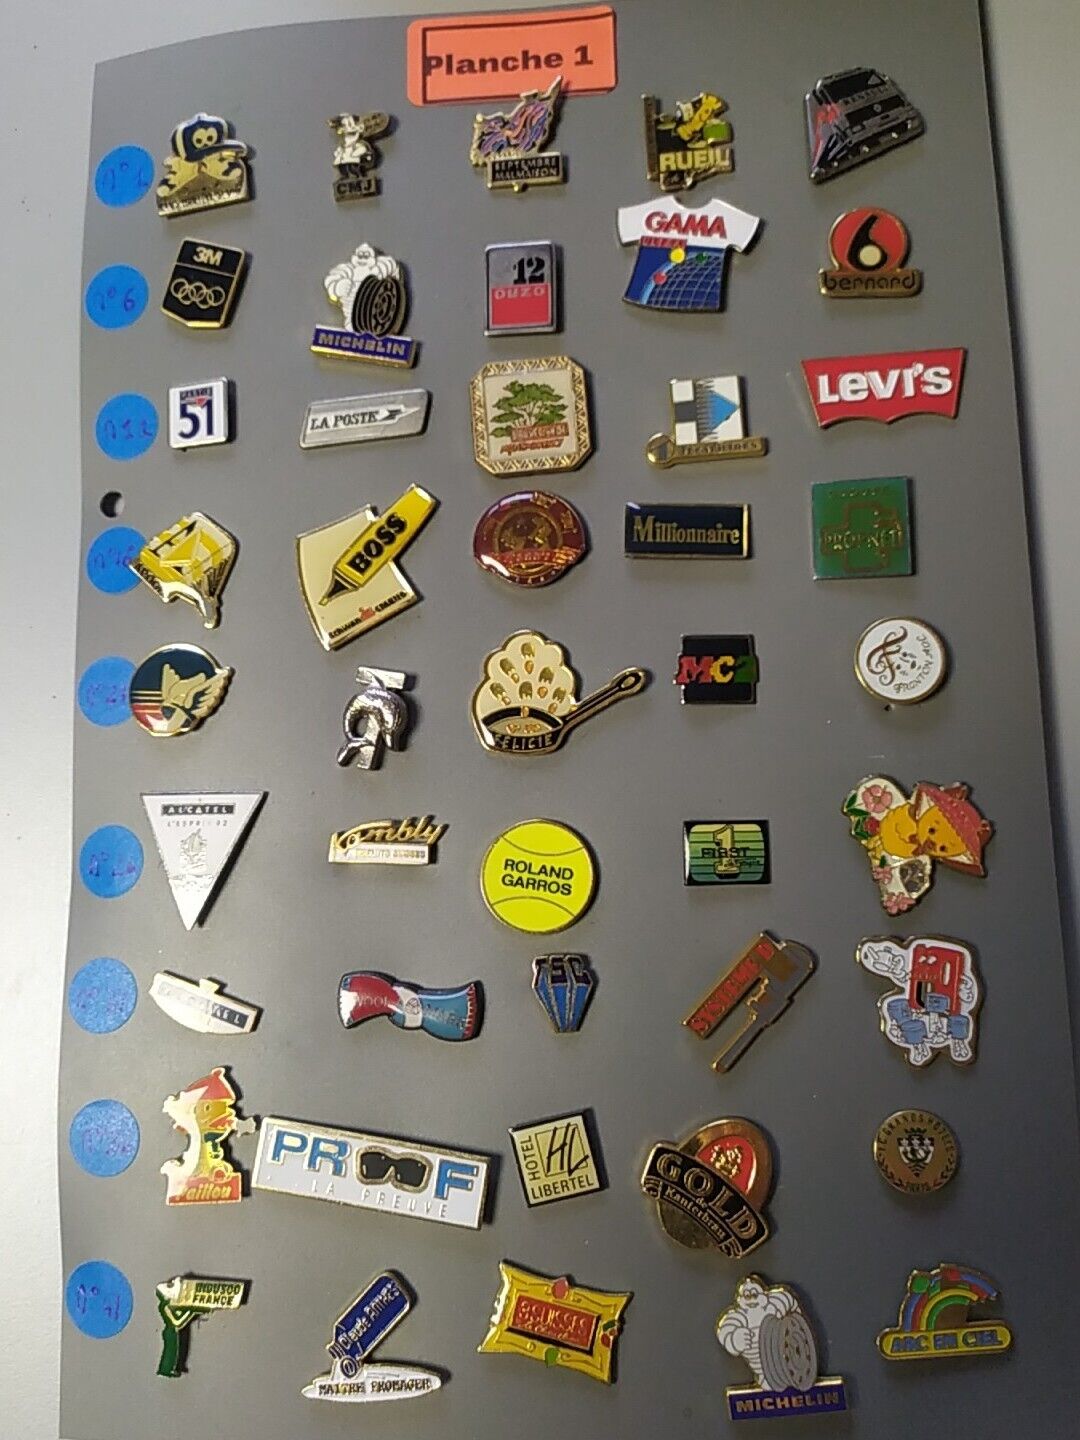 20 PINS TO CHOOSE FROM €30 SHIPPING INCLUDED FOR FRANCE (€12 FOREIGN PACKAGE)